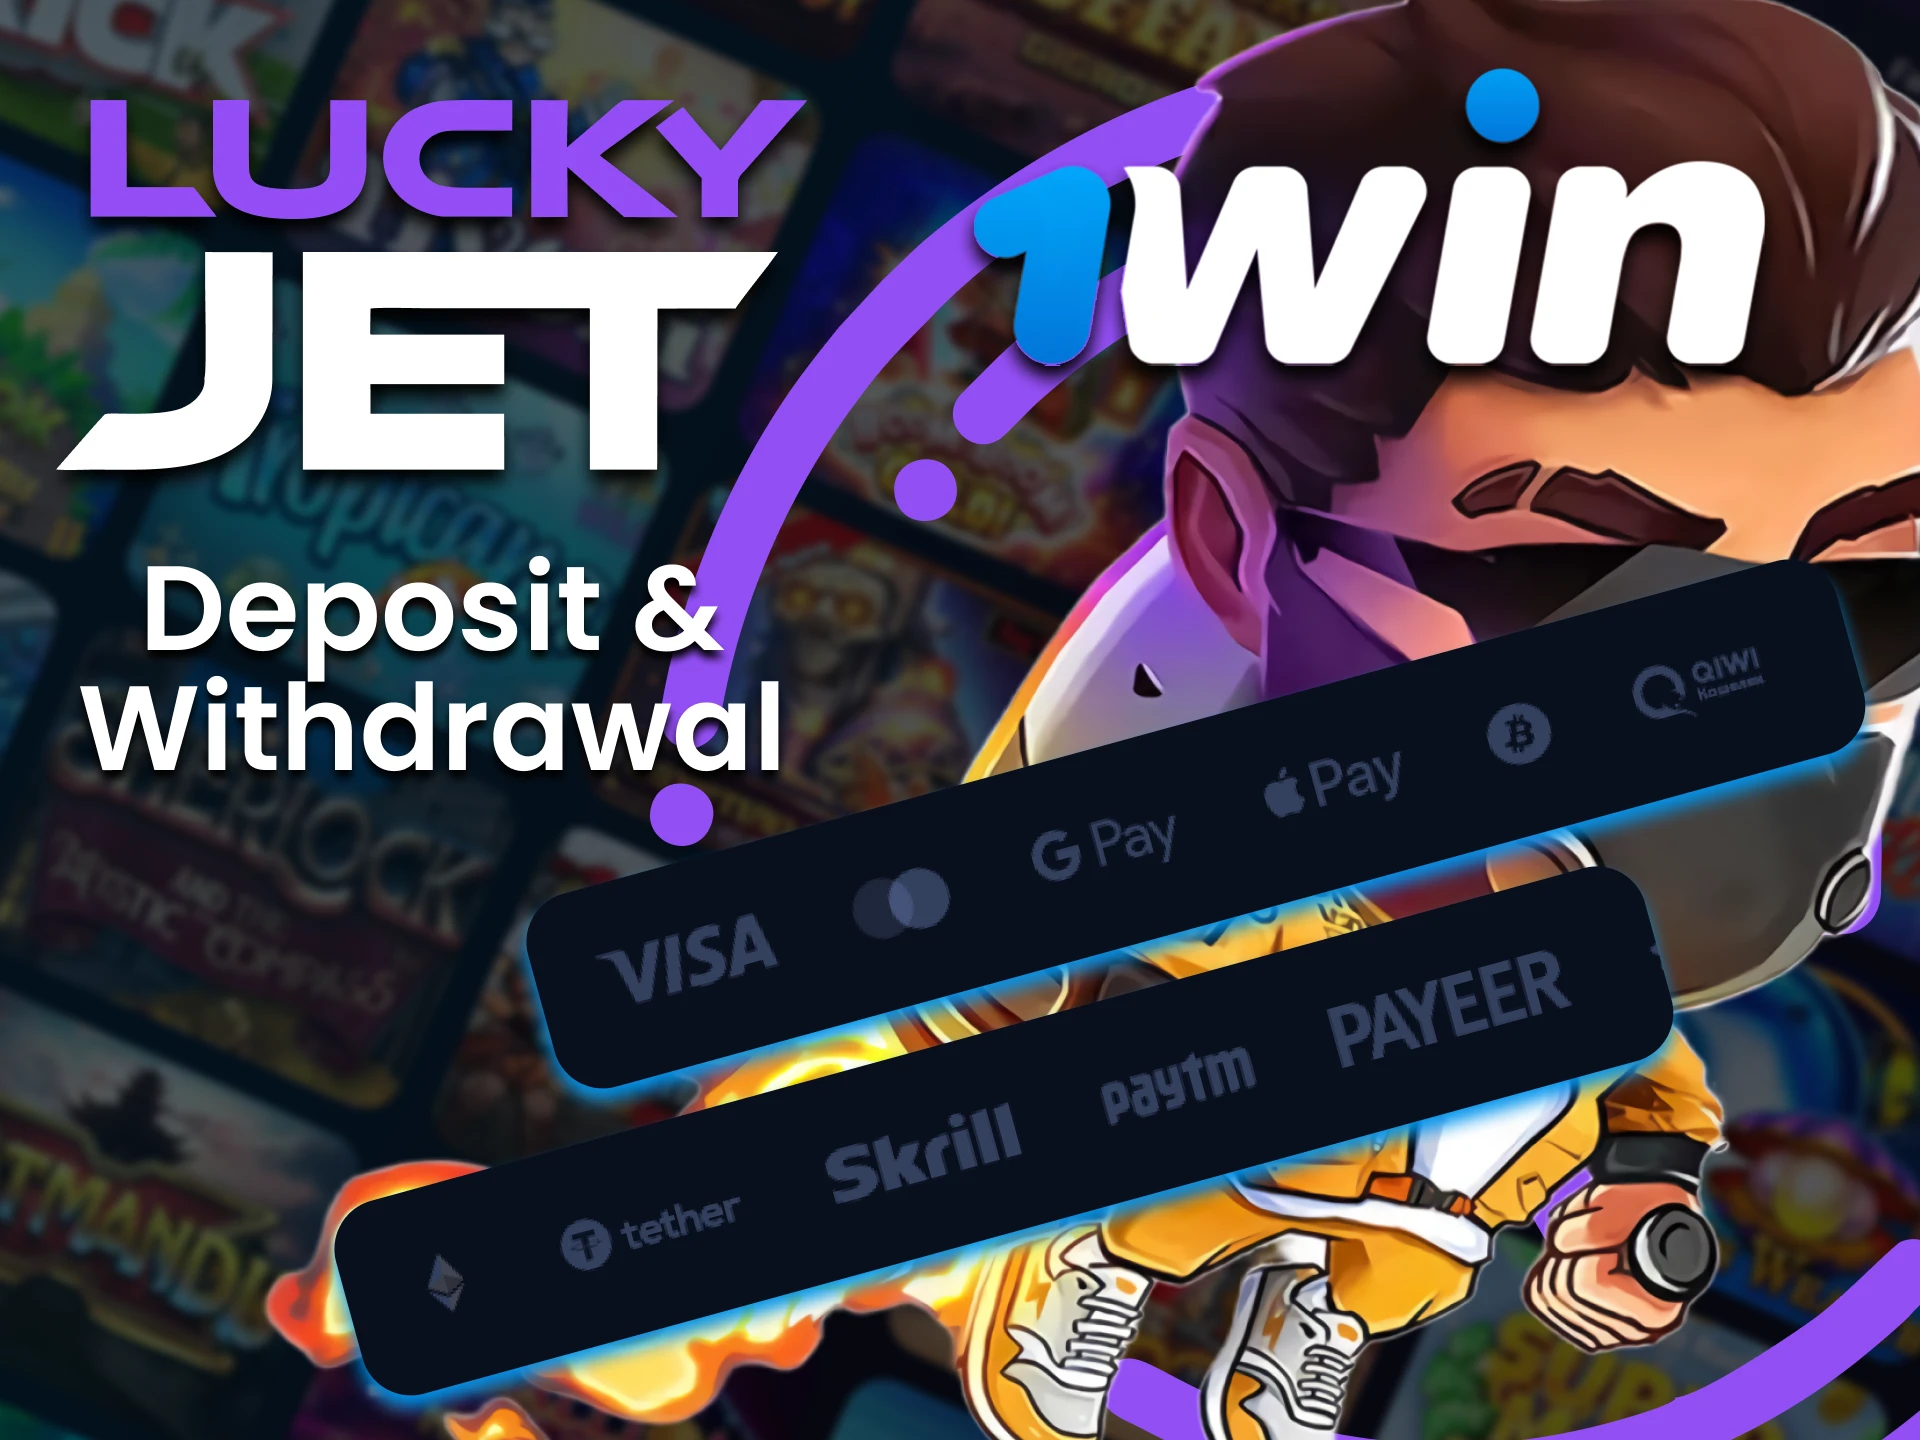 Choose a convenient transaction method from 1win to play Lucky Jet.